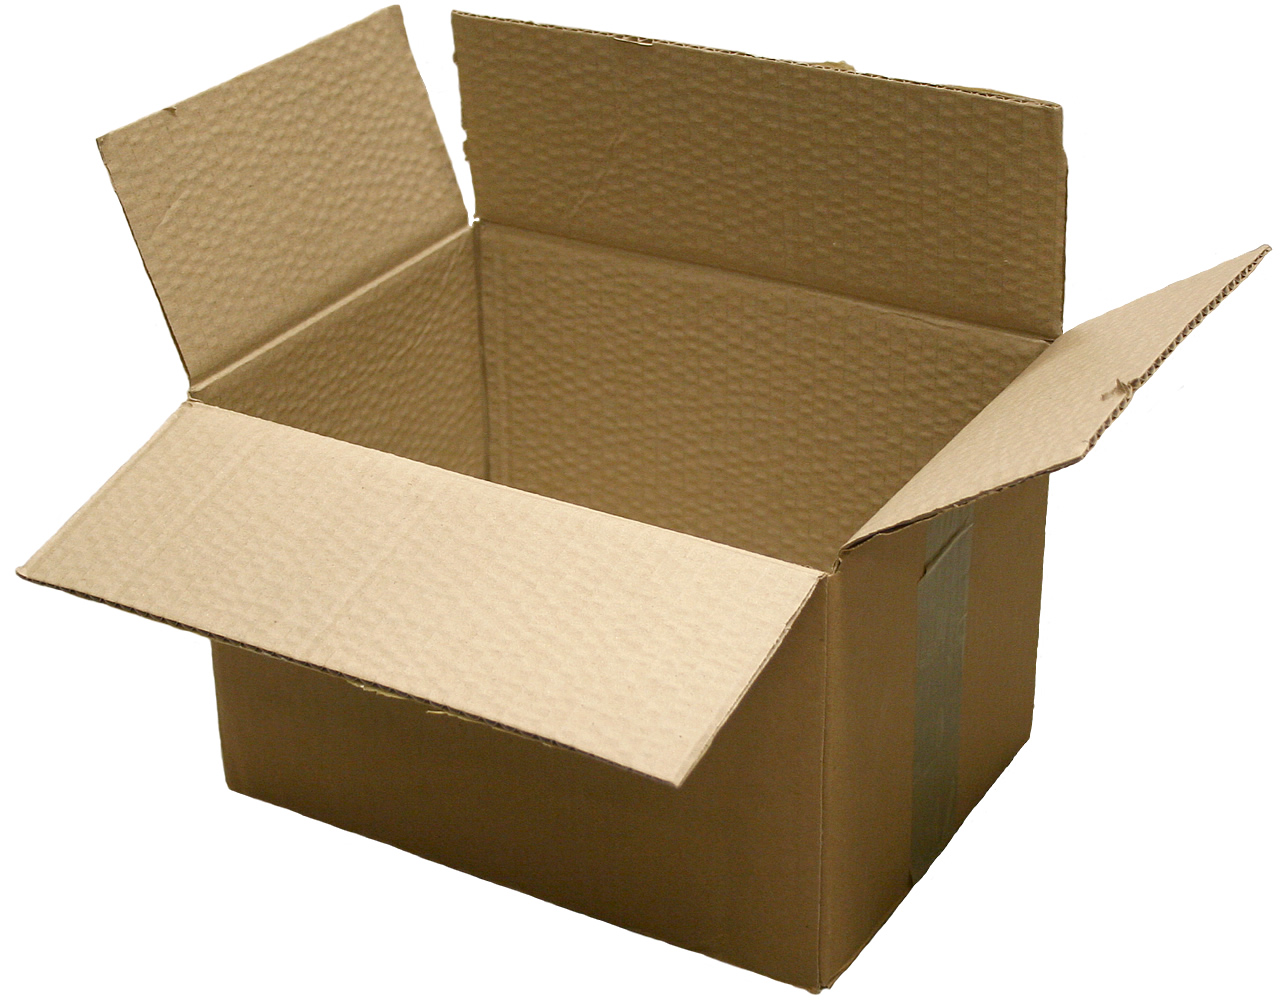 Ideas to Reuse or Recycle Packing Materials After Your Move ...